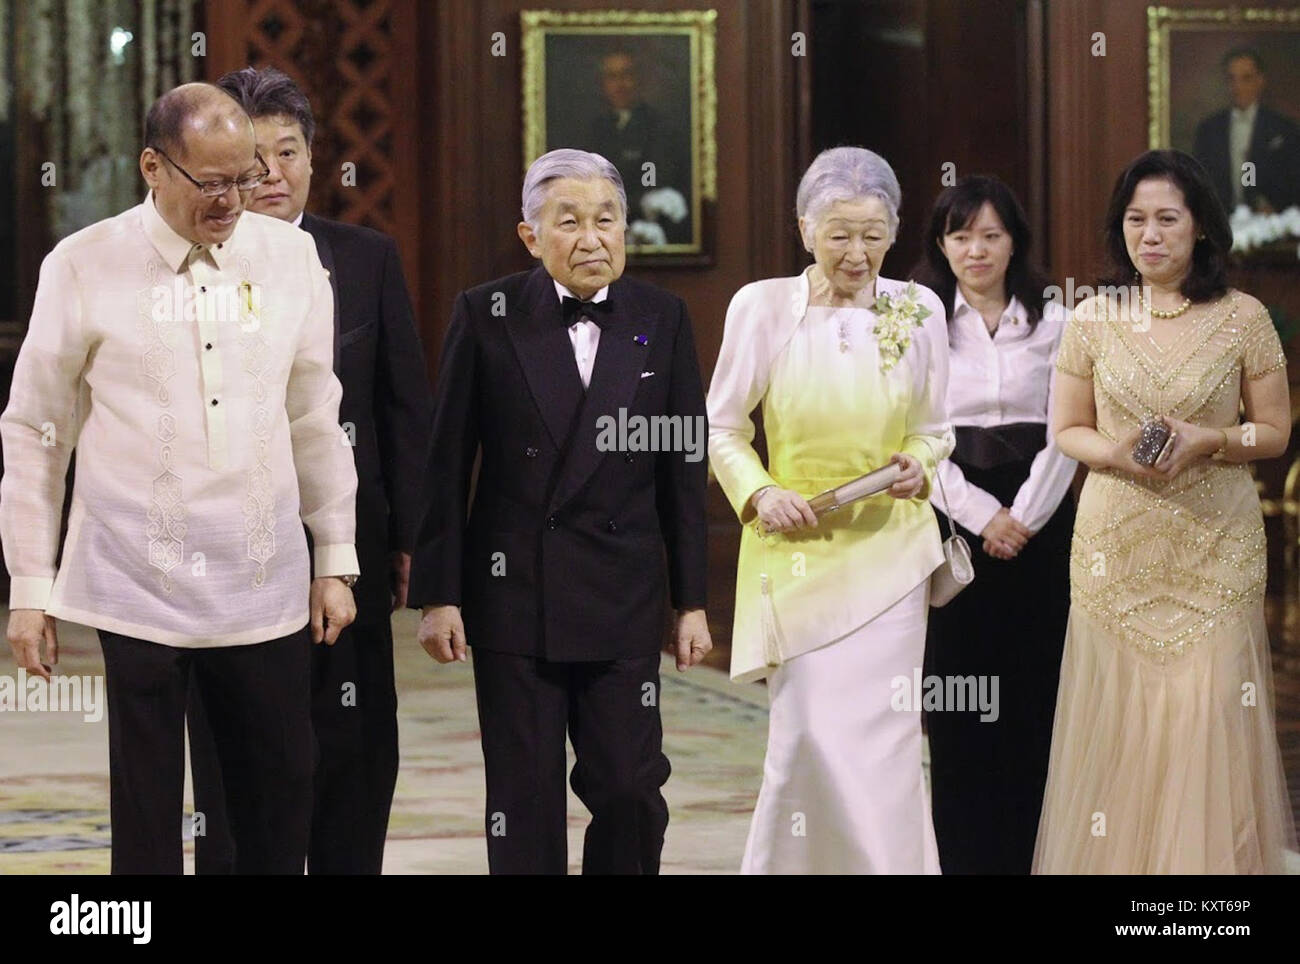 Emperor Akihito and Empress Michiko of Japan during their arrival at the Malacañan Palace for the State Dinner 012716 Stock Photo